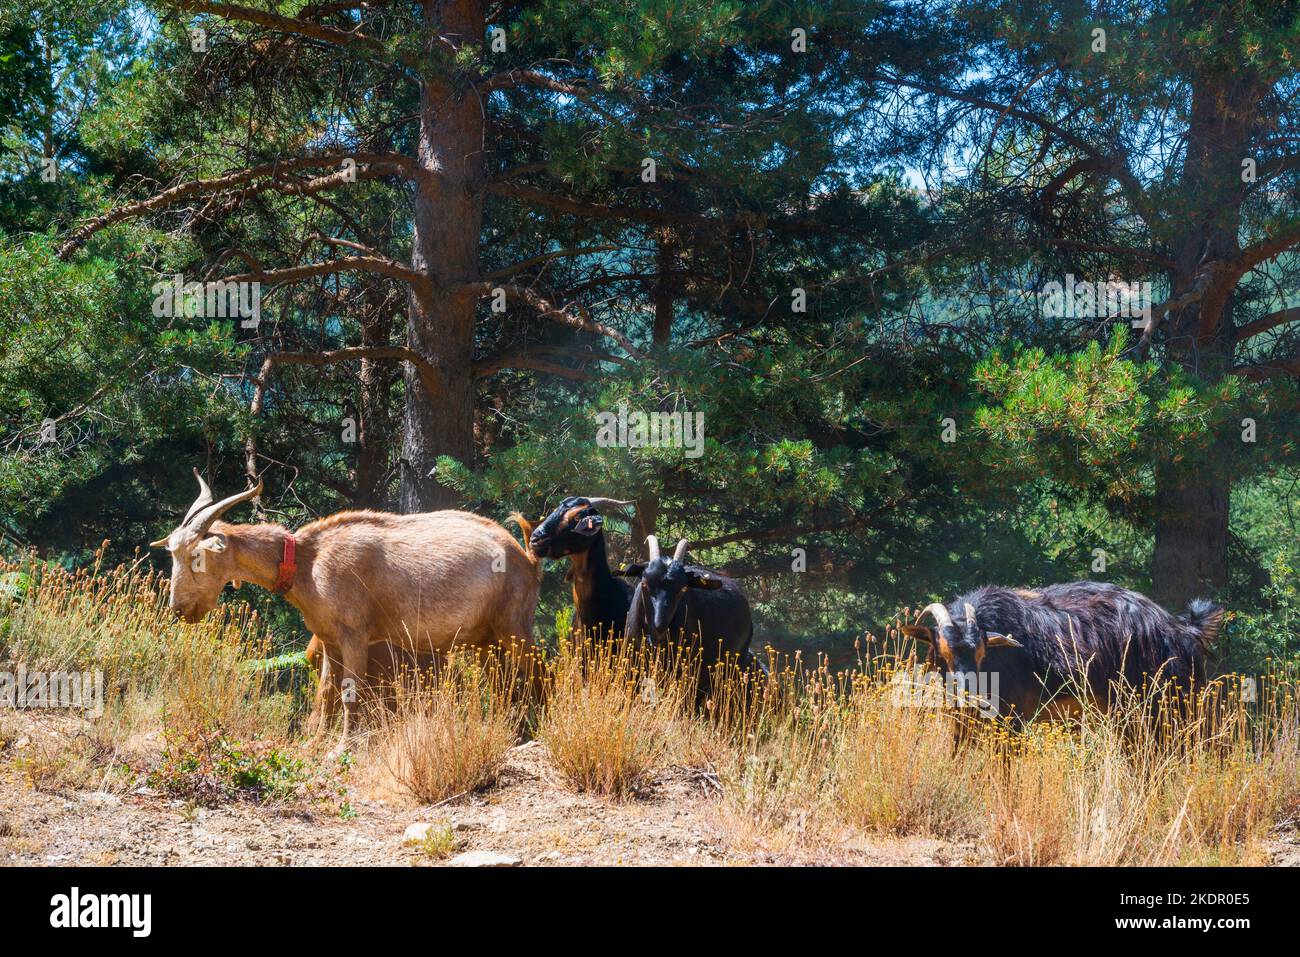 Goats in the forest. Stock Photo